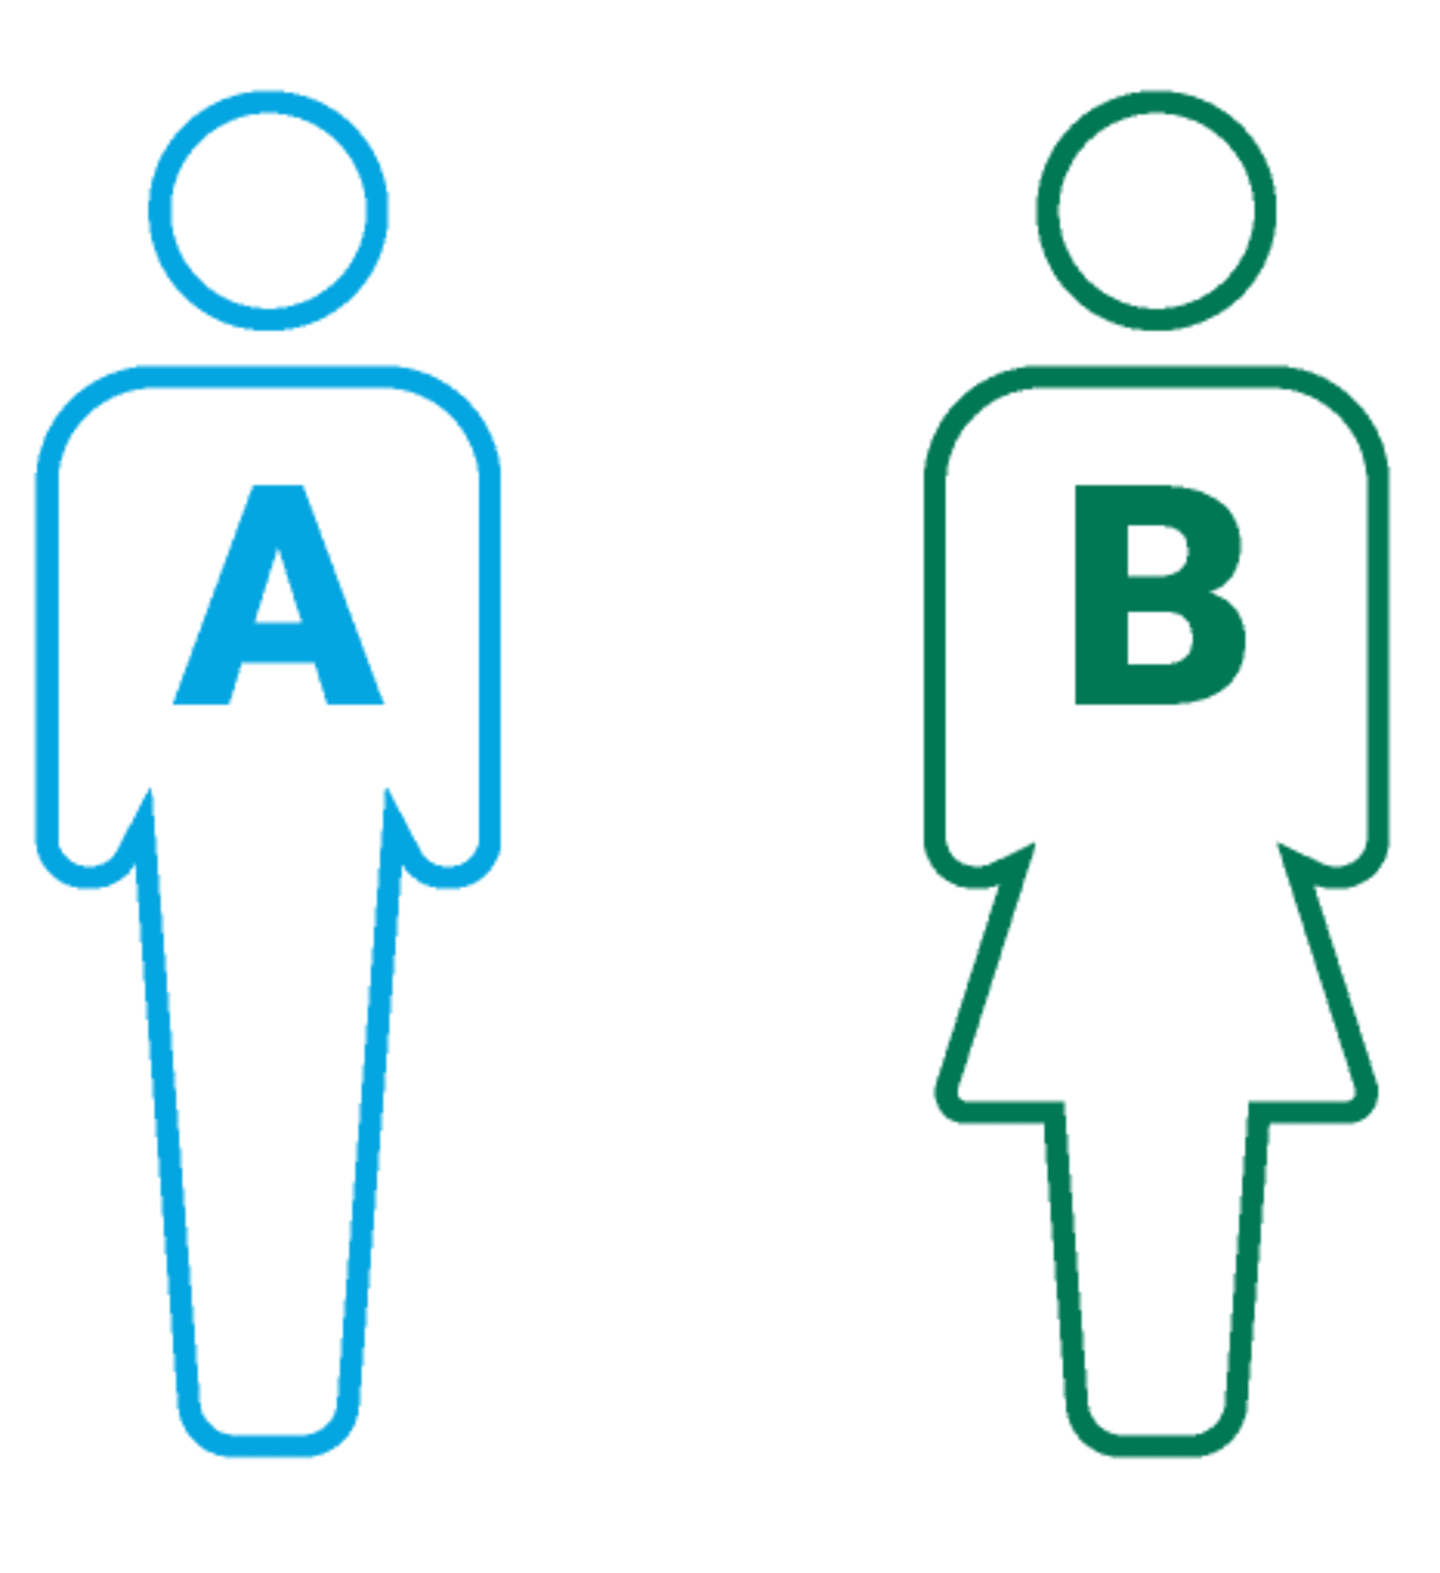 Icon of blue male outline labeled "A" and green female outline labeled "B". 